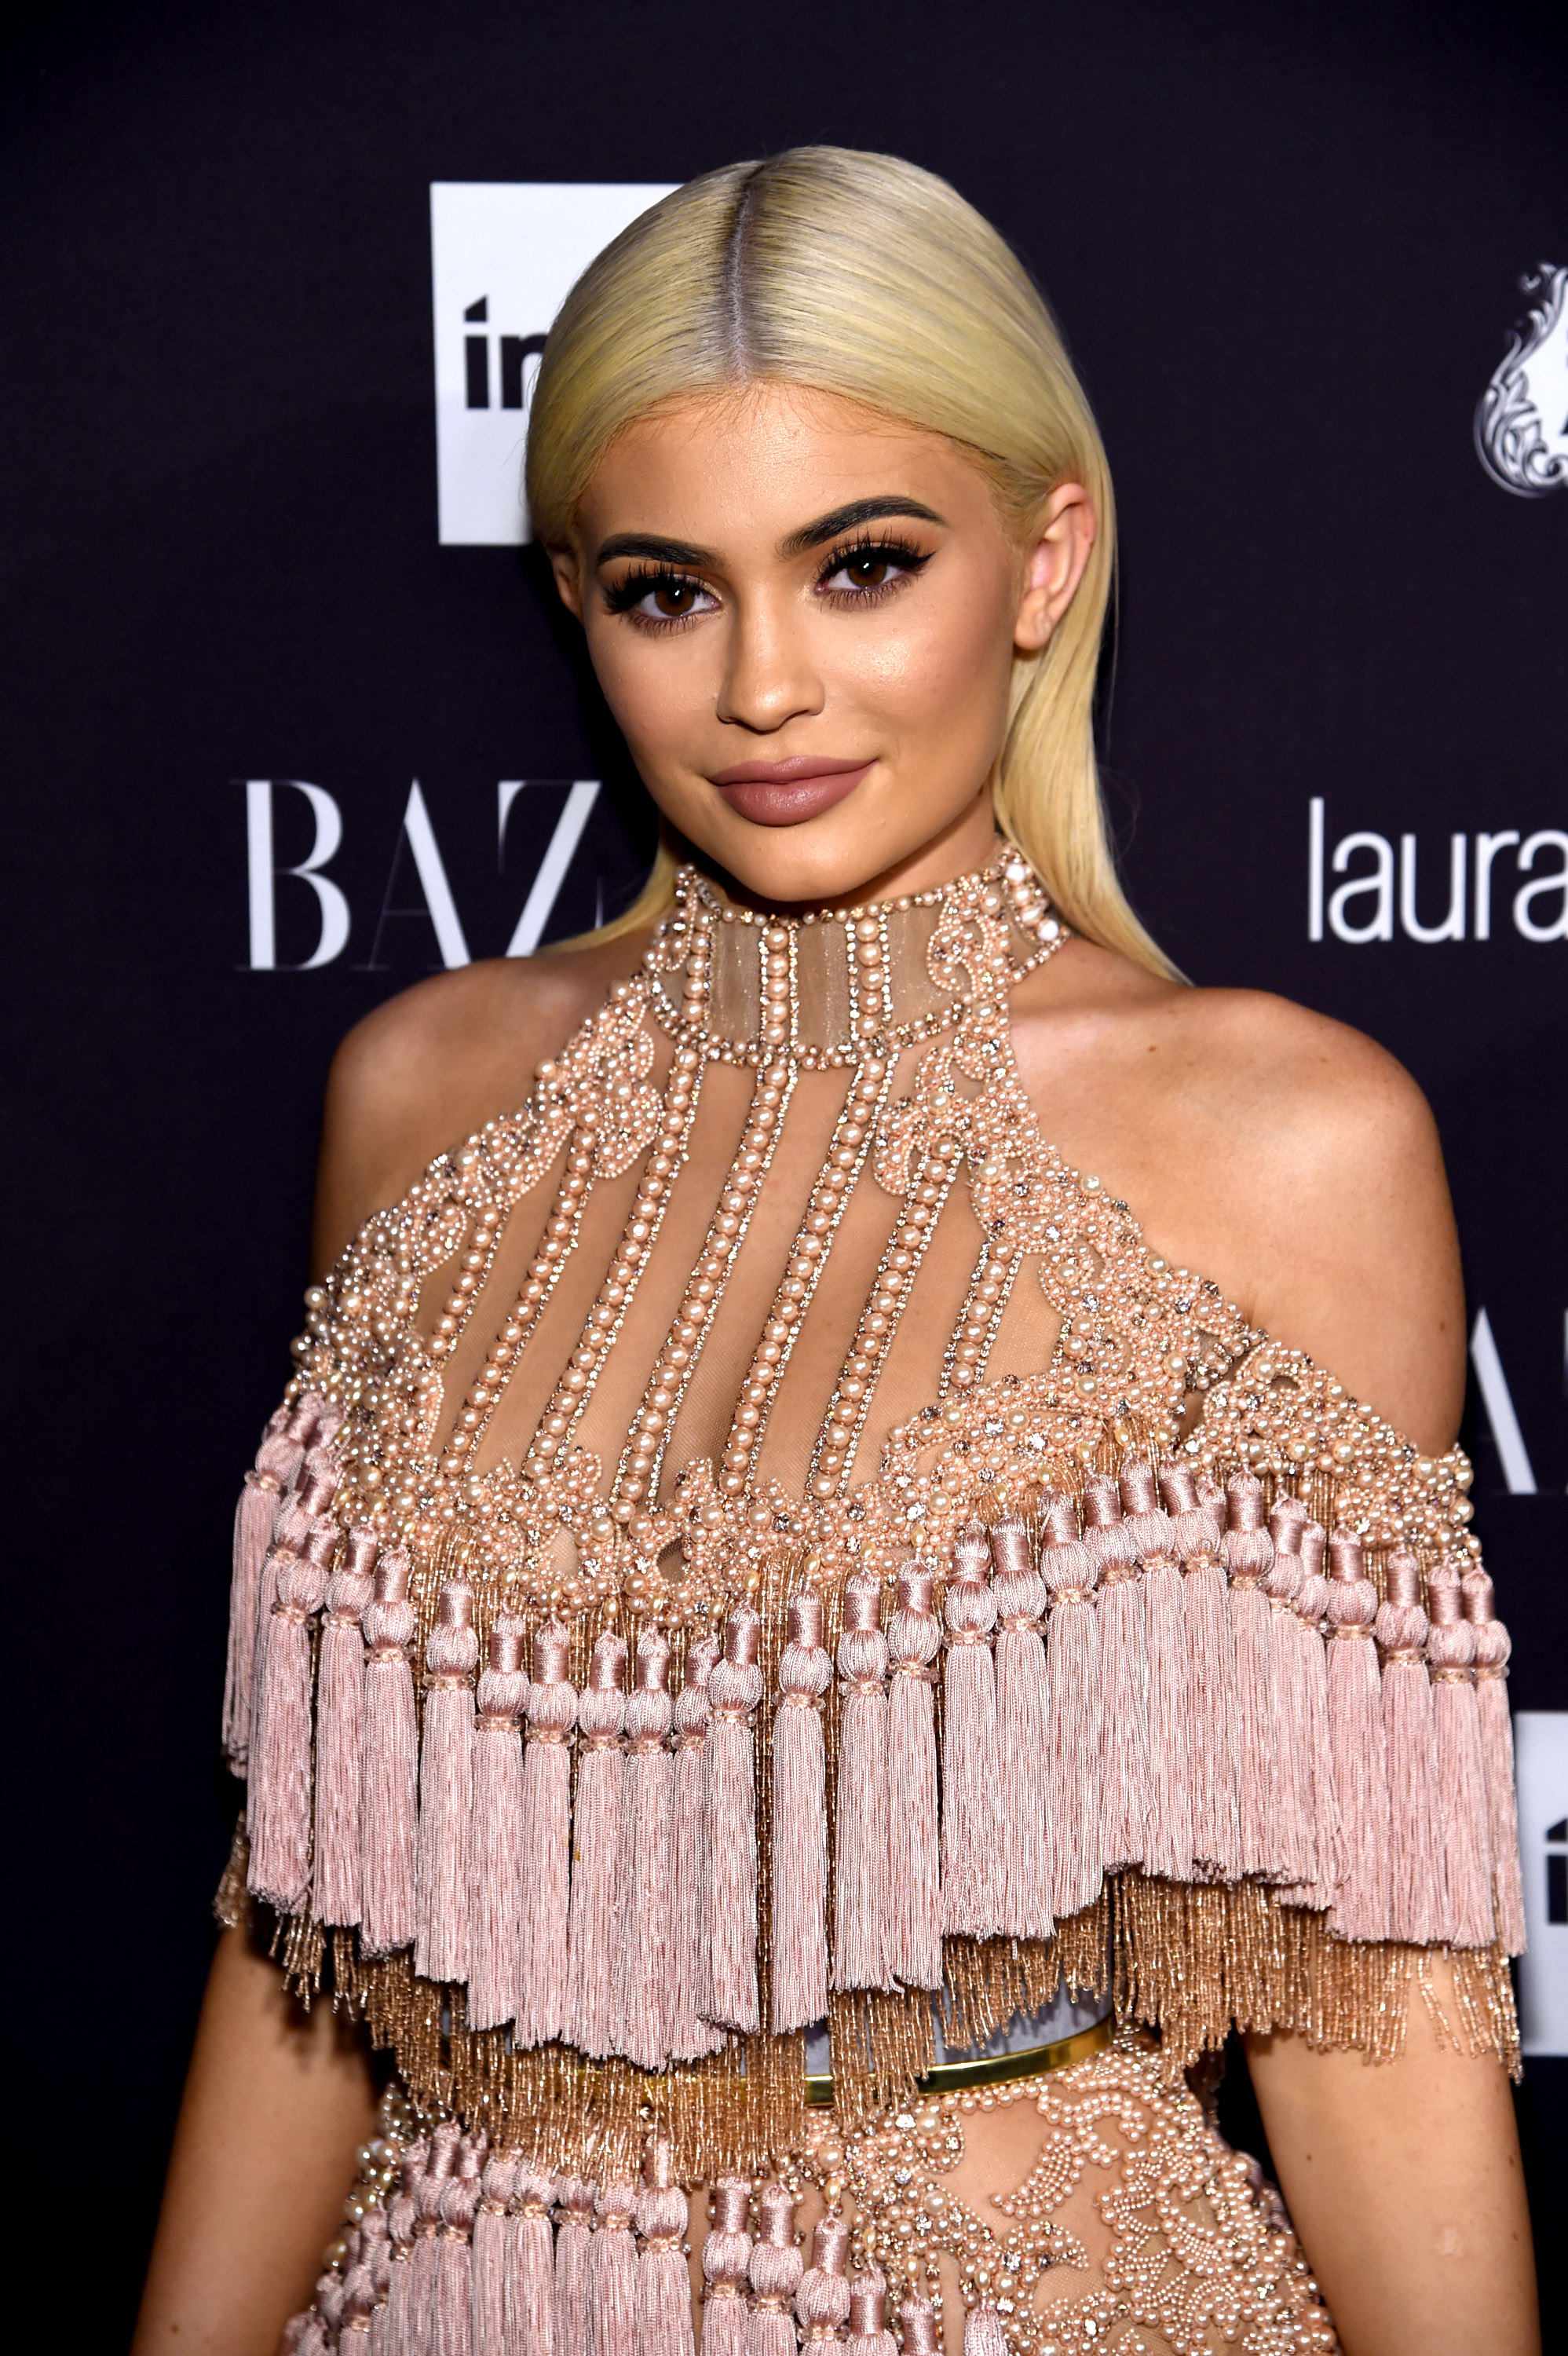 Kylie Jenner Opens First Pop-Up Shop, Rita Ora's Most Coveted